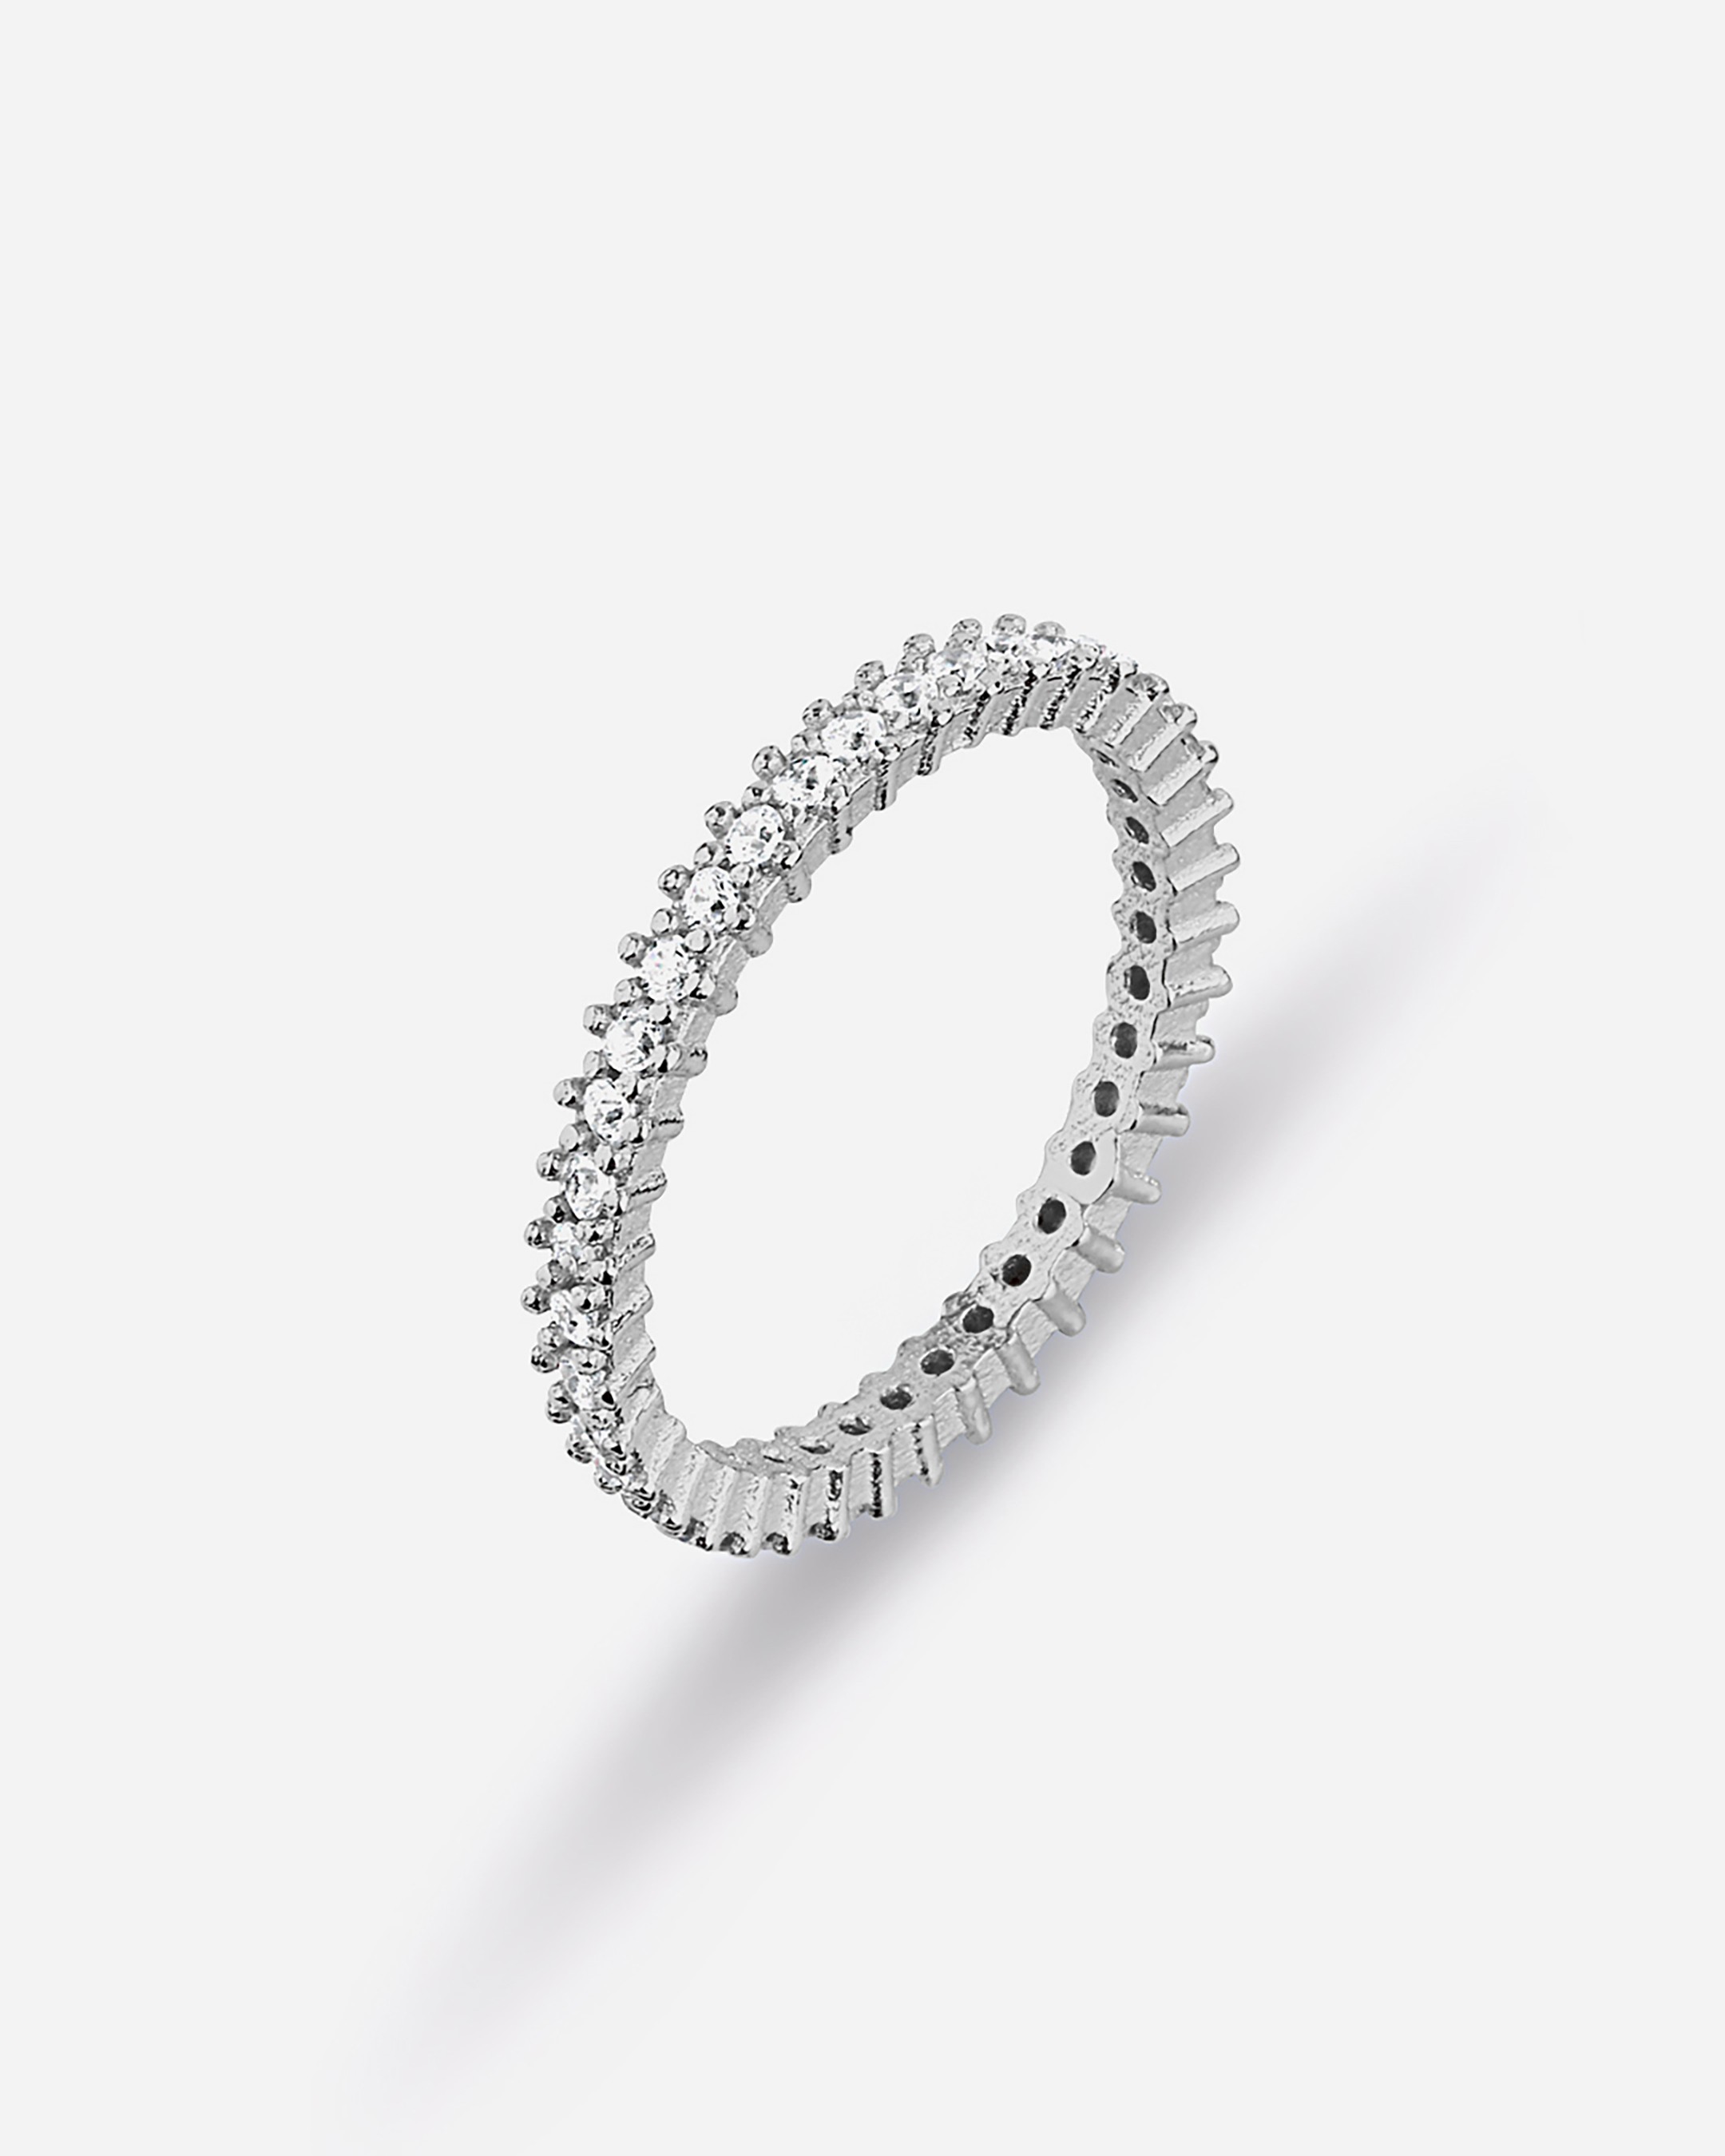 Tamtur Silver Ring - White Gold